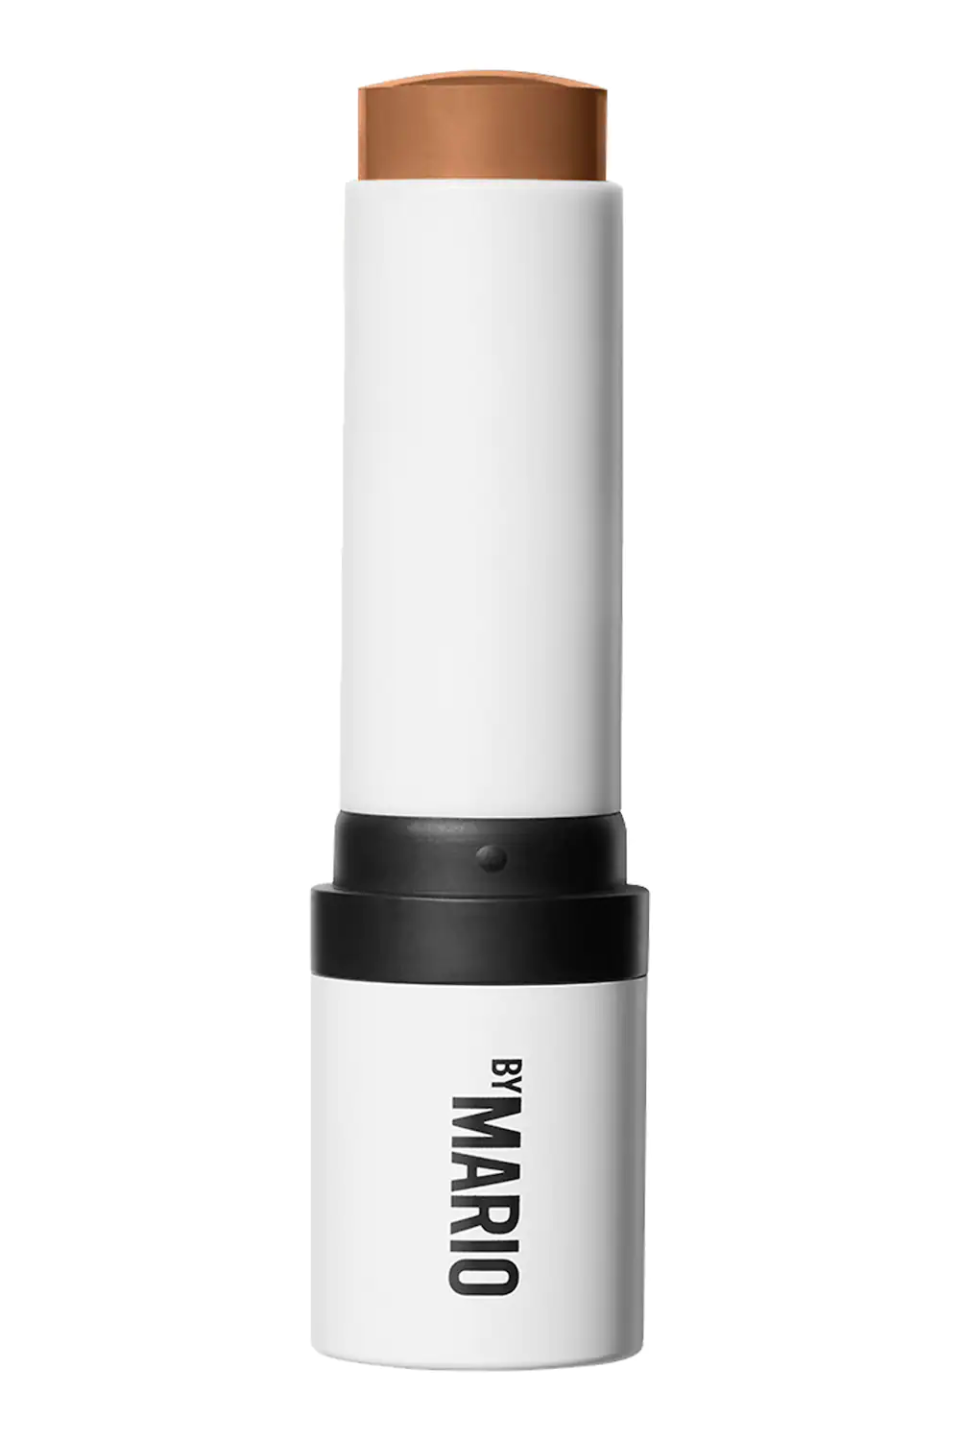 Makeup by Mario SoftSculpt Shaping Stick